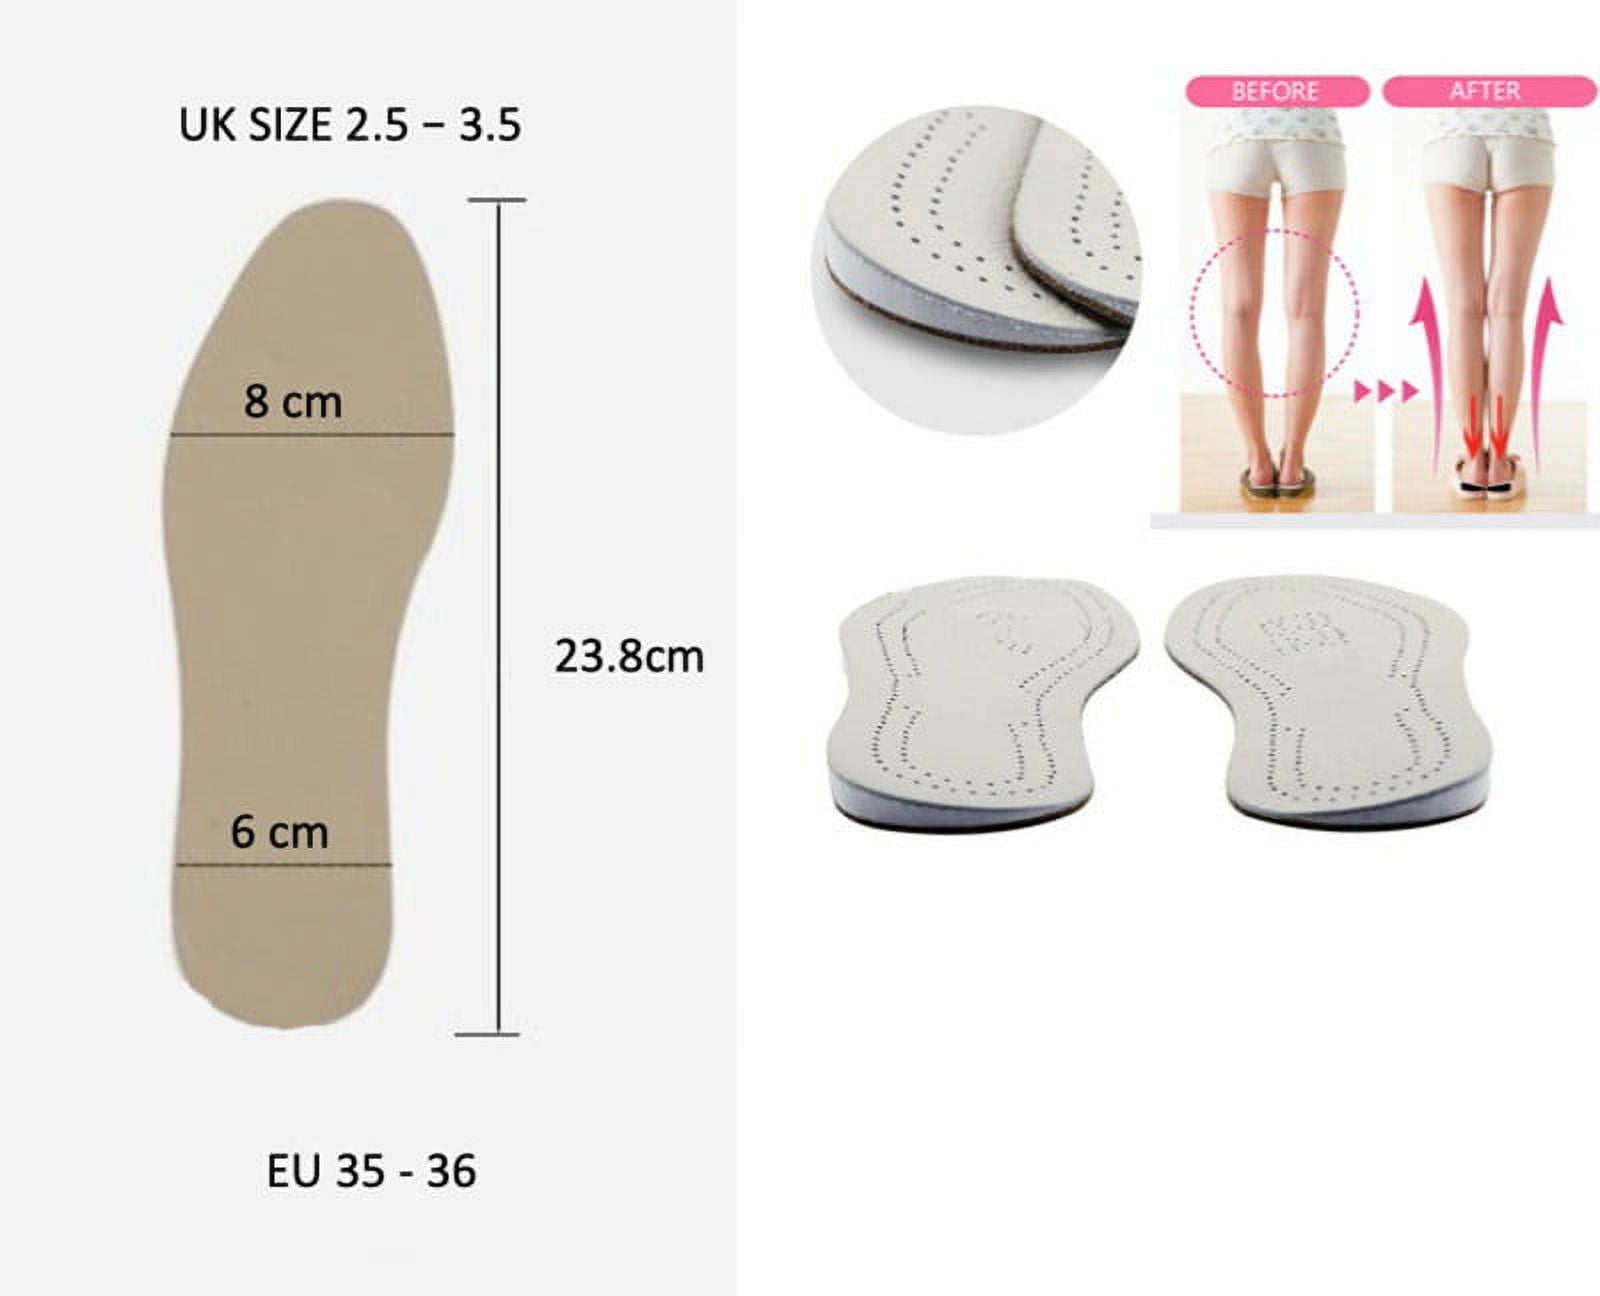 O/X Leg Orthopedic Insoles,Supination Insoles Flat Feet Arch Support  Insoles for Foot Alignment,Knock Knee Pain,Over Supination (Size : 41)